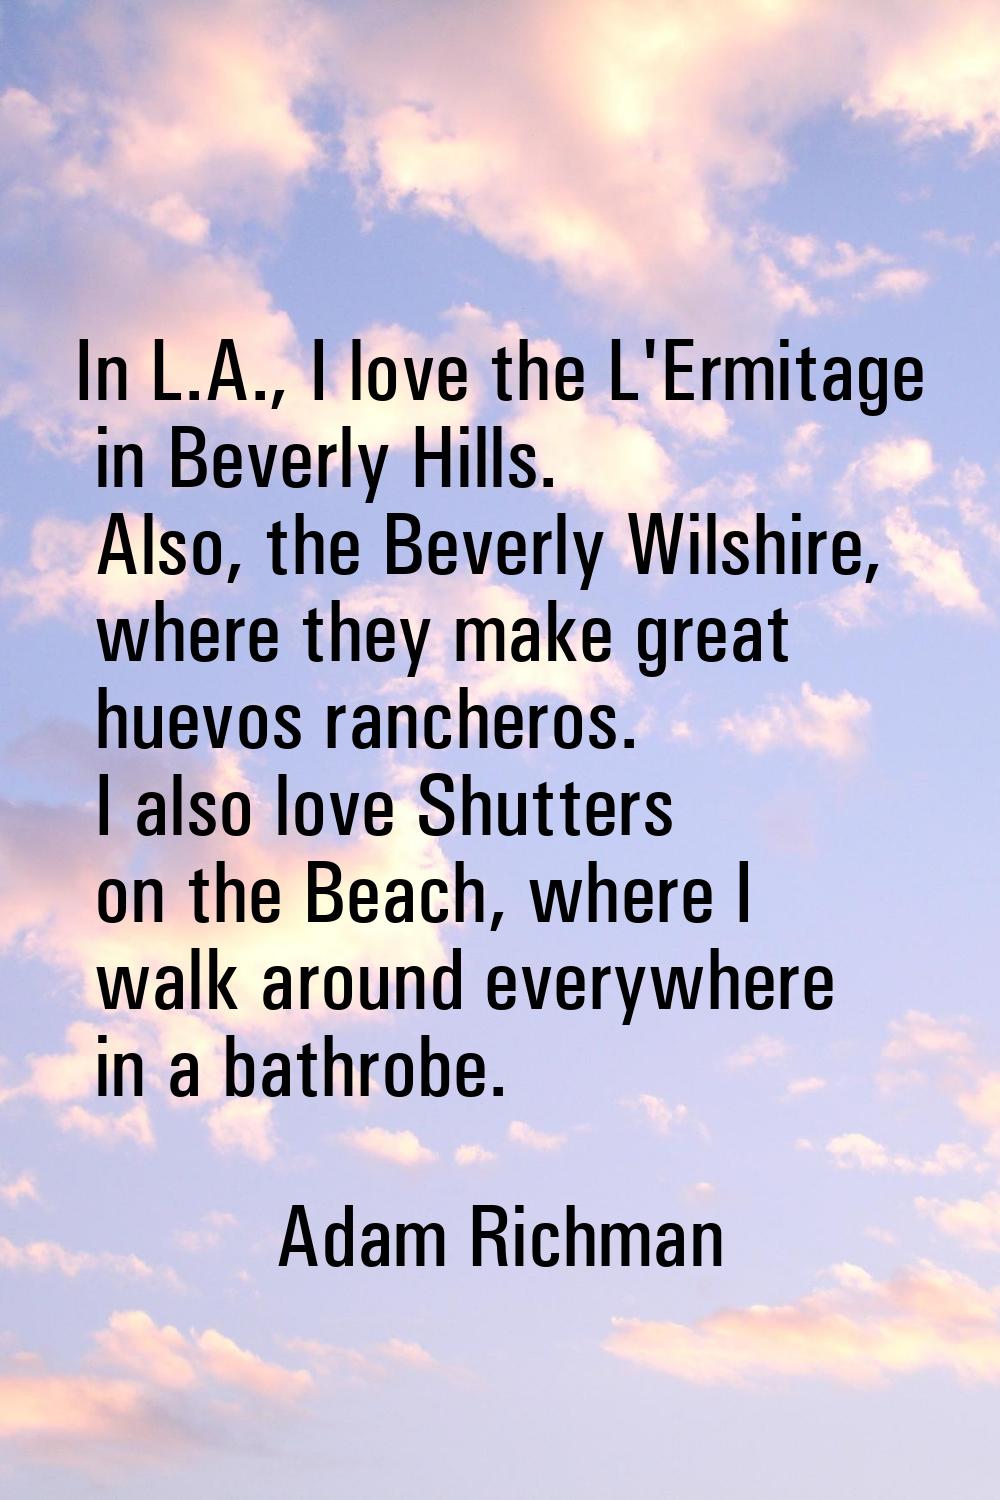 In L.A., I love the L'Ermitage in Beverly Hills. Also, the Beverly Wilshire, where they make great 